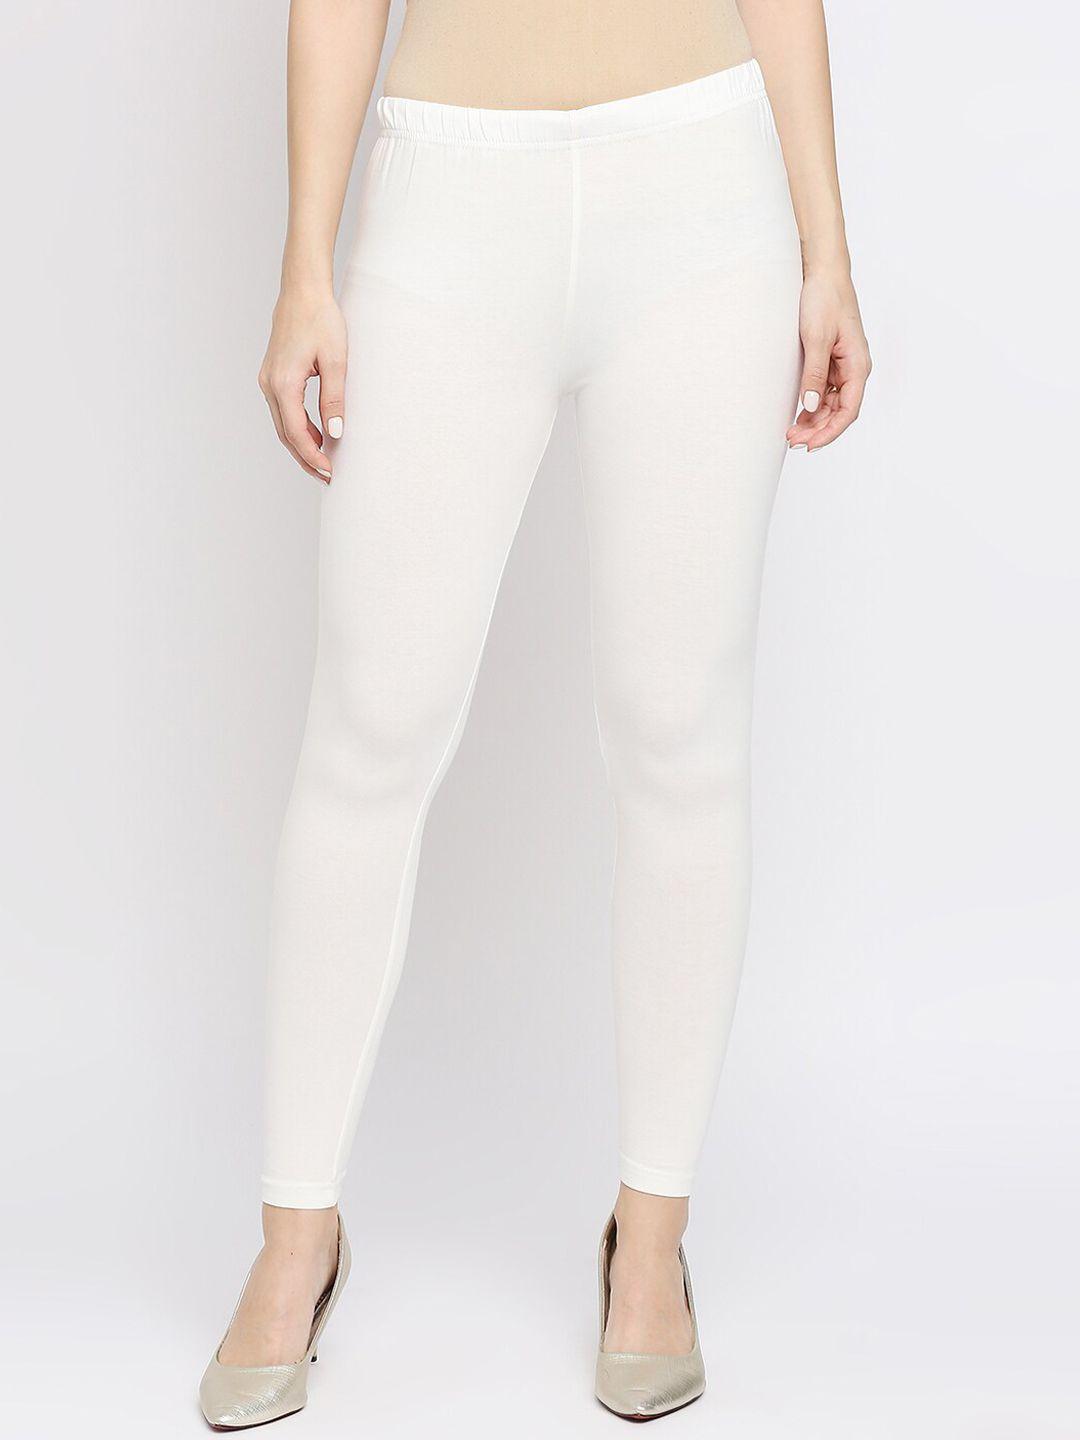 ethnicity-women-off-white-solid-cotton-lycra-ankle-length-leggings